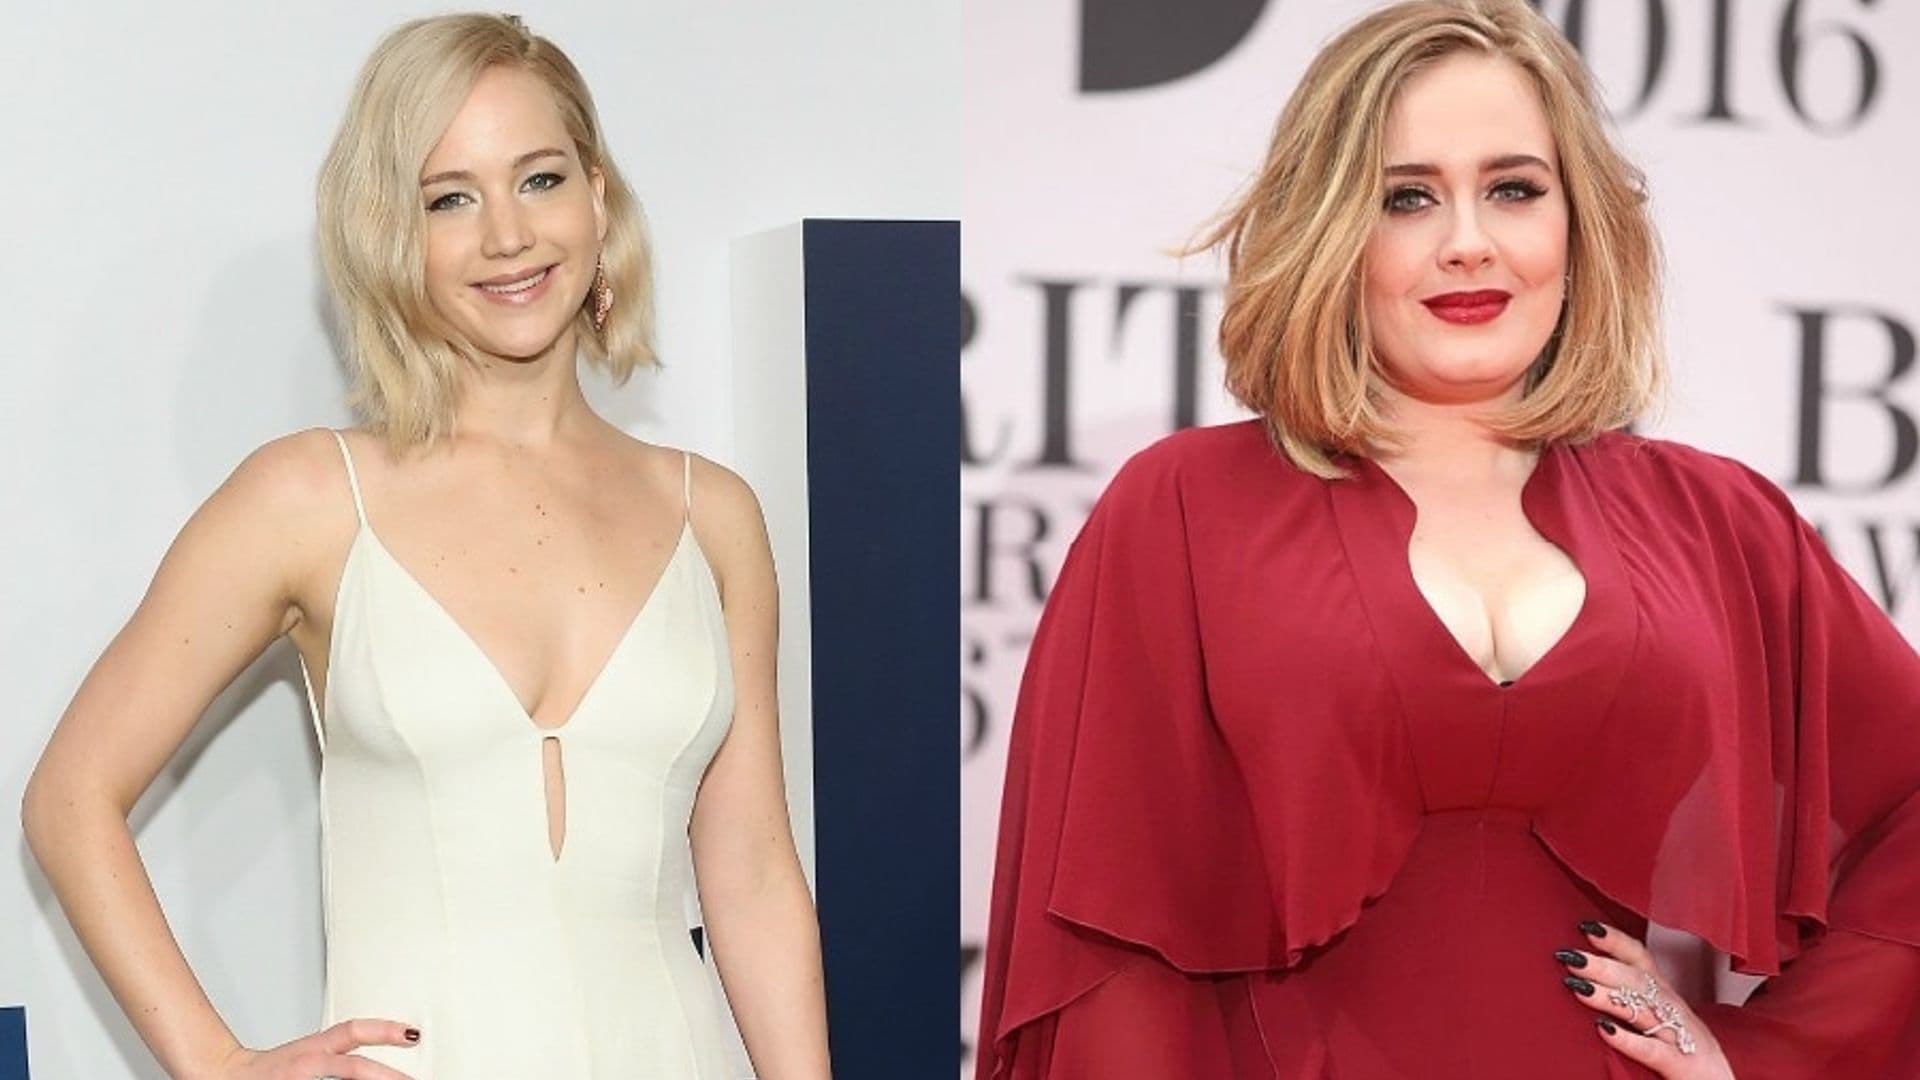 Jennifer Lawrence penned an essay for her pal Adele.
<br>
Photos: Getty Images/WireImage